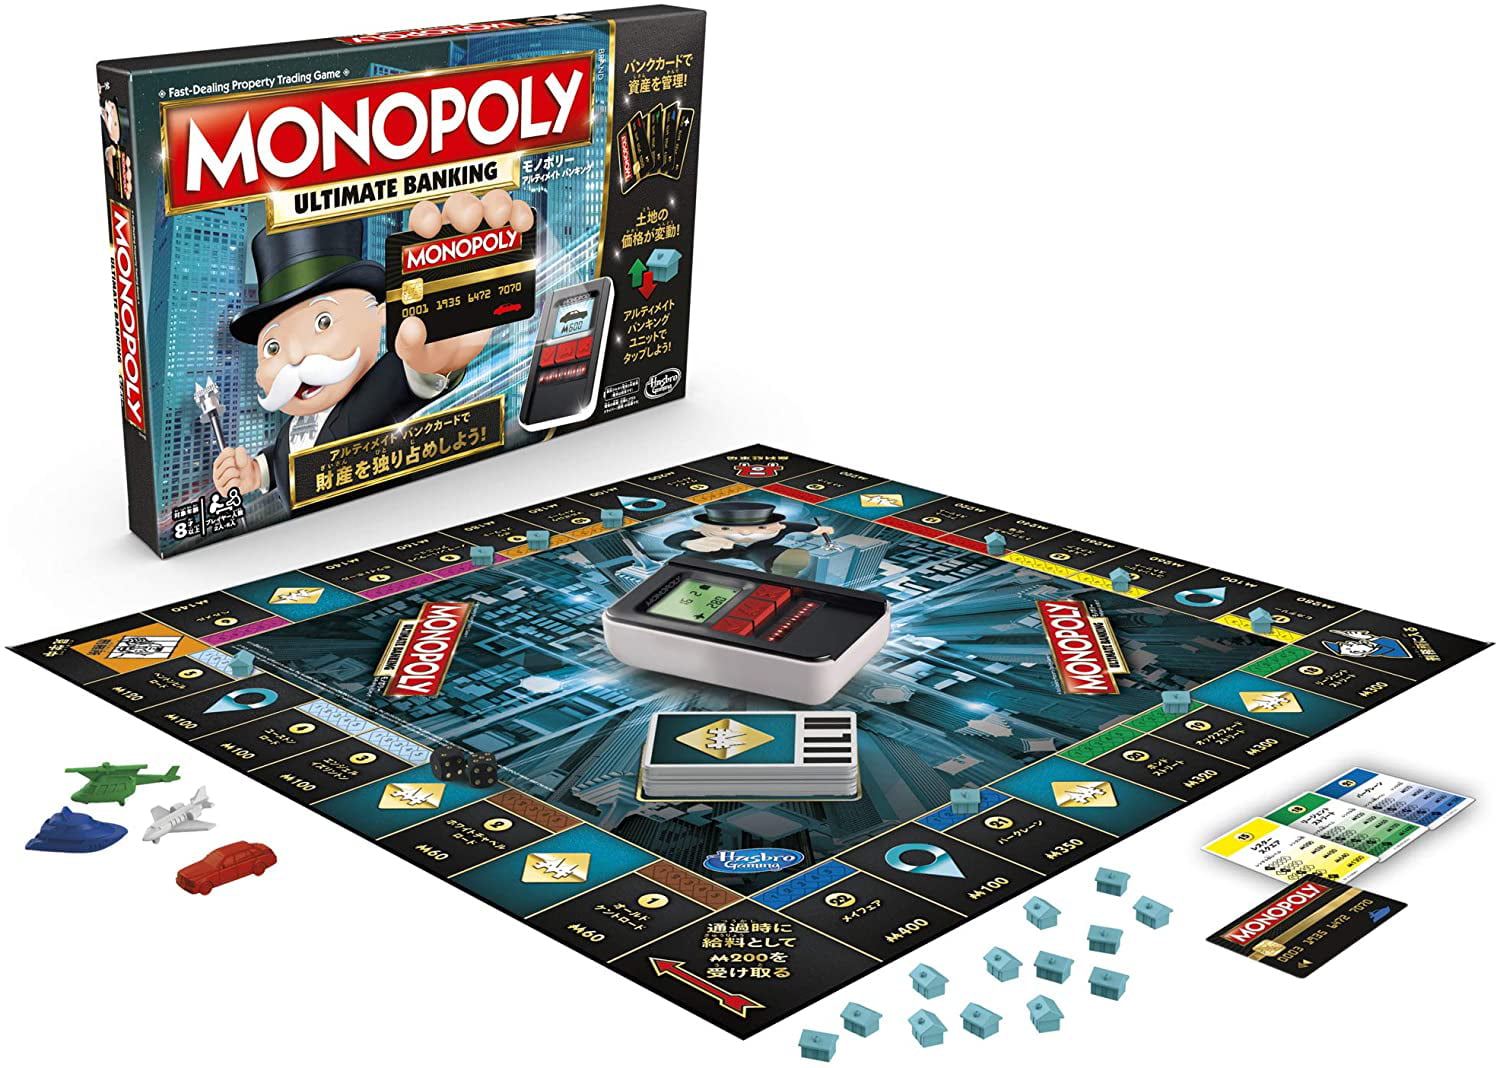 Monopoly Ultimate Banking Board Game exclusive